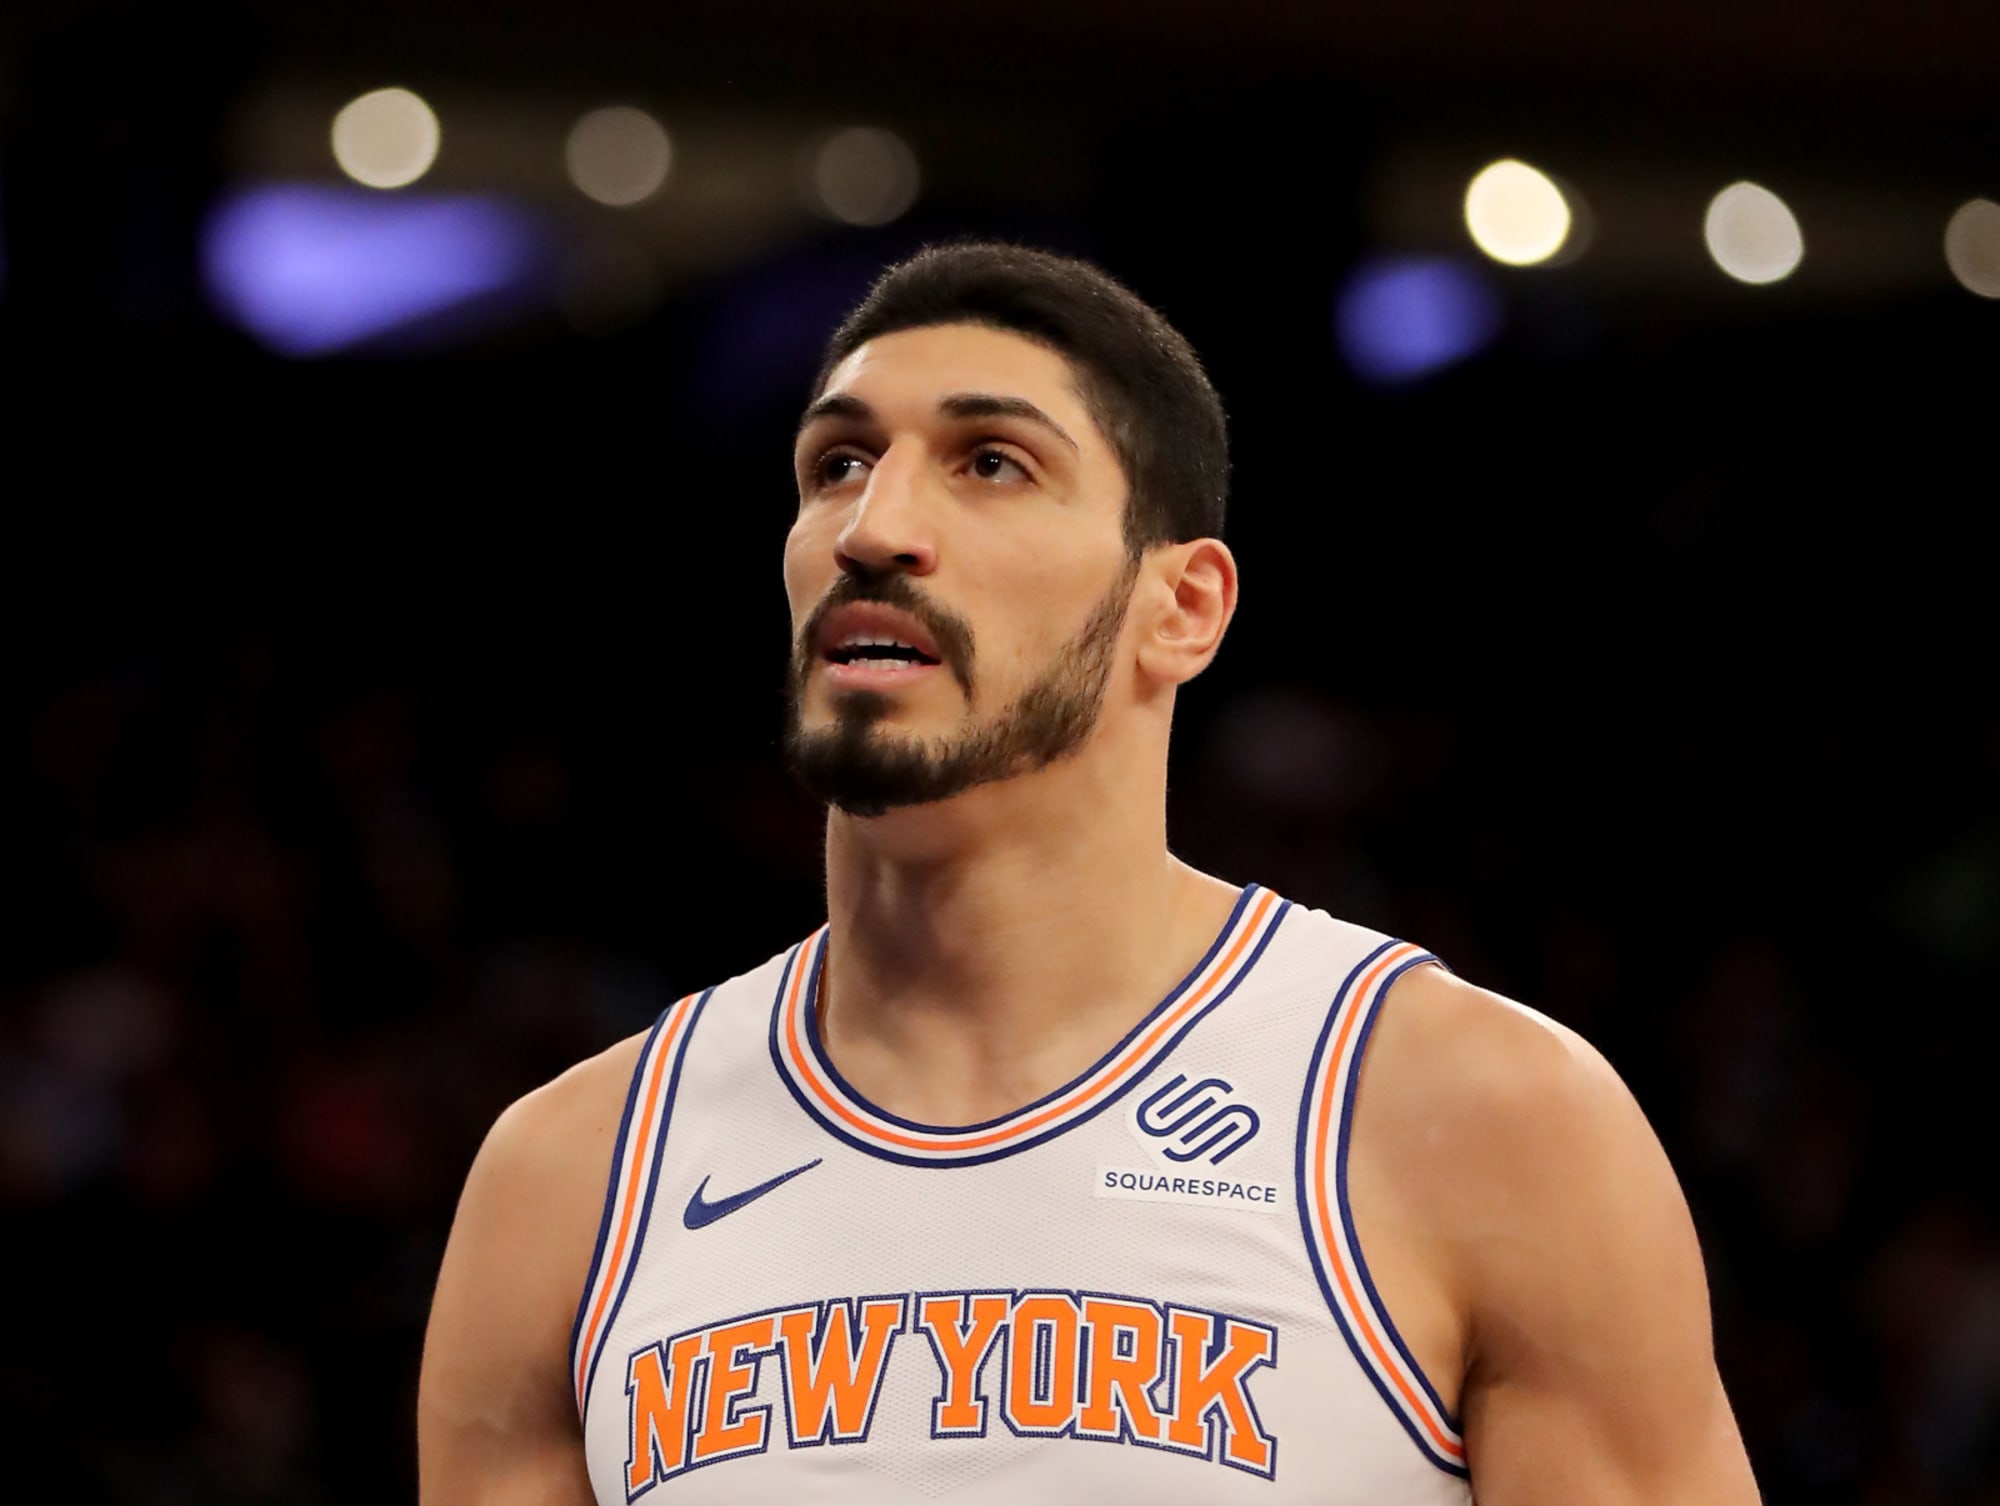 Enes Kanter is exactly the type of player this Boston Celtics team needs